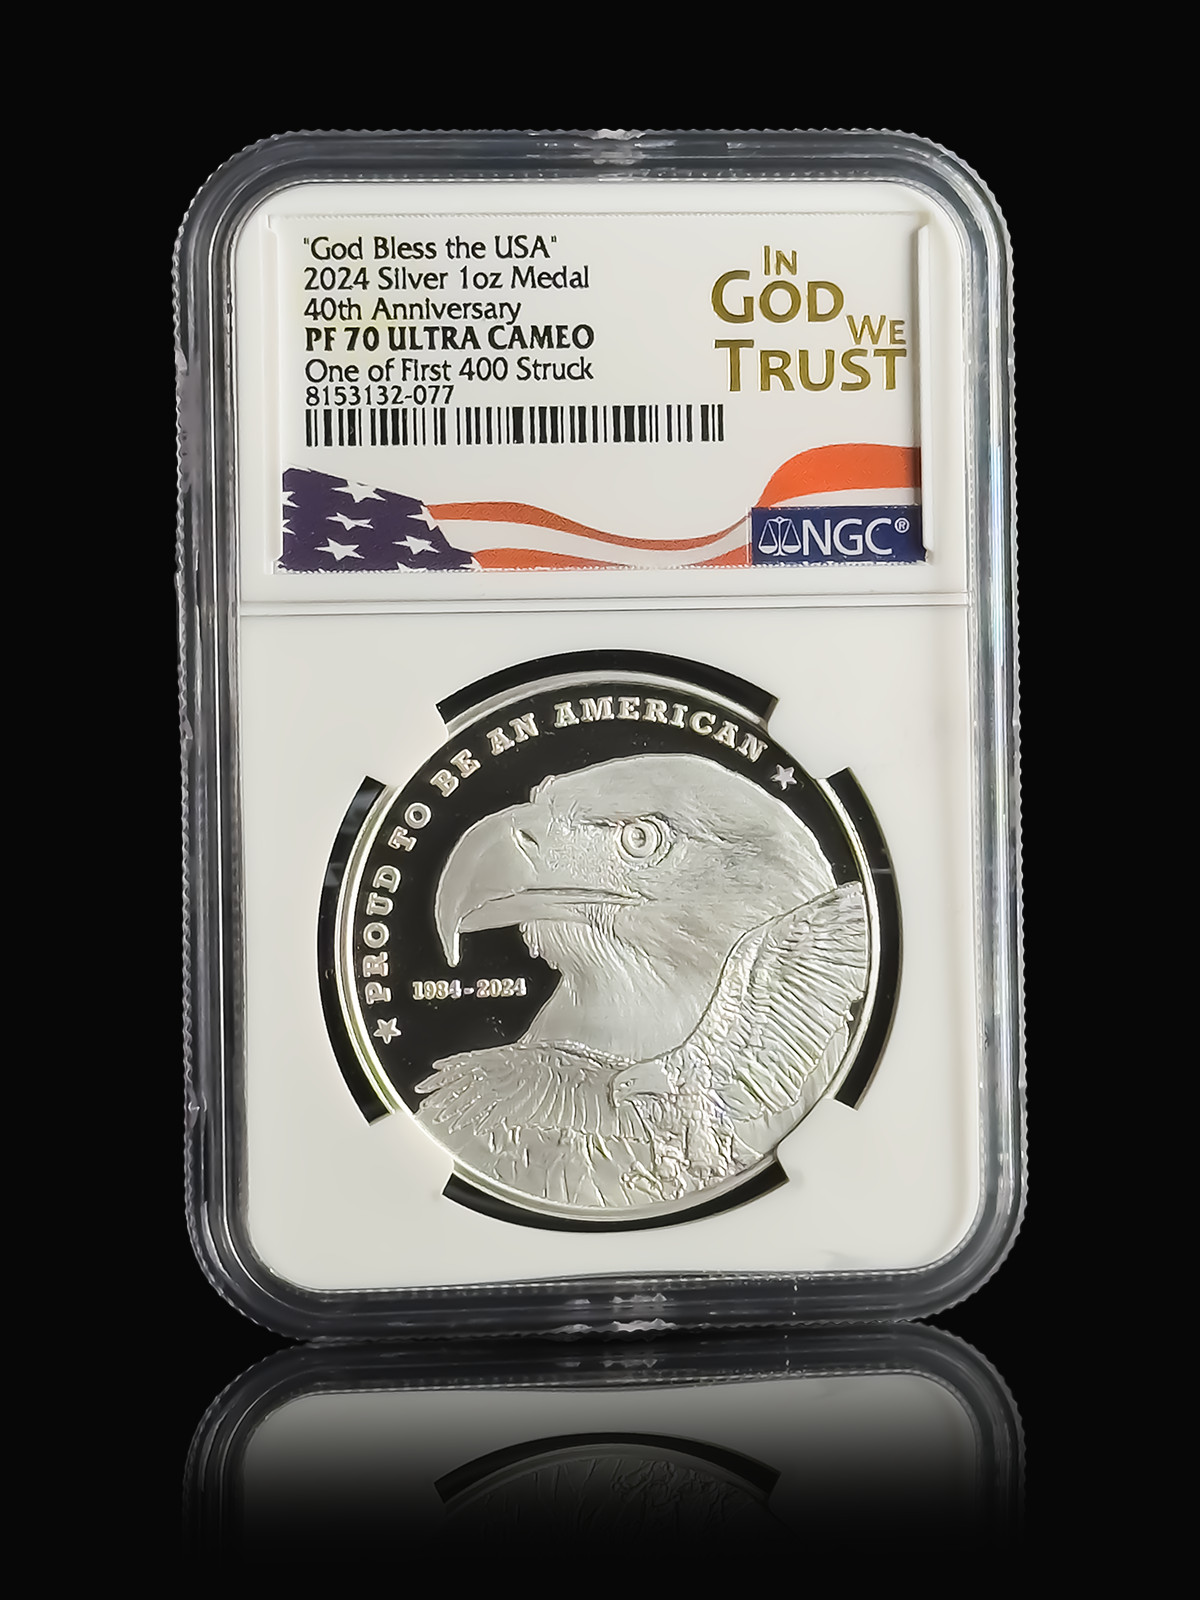 Lee Greenwood "God Bless The USA" 40th Anniversary Coin | NGC PF70 Ultra Cameo | Autographed by Lee Greenwood